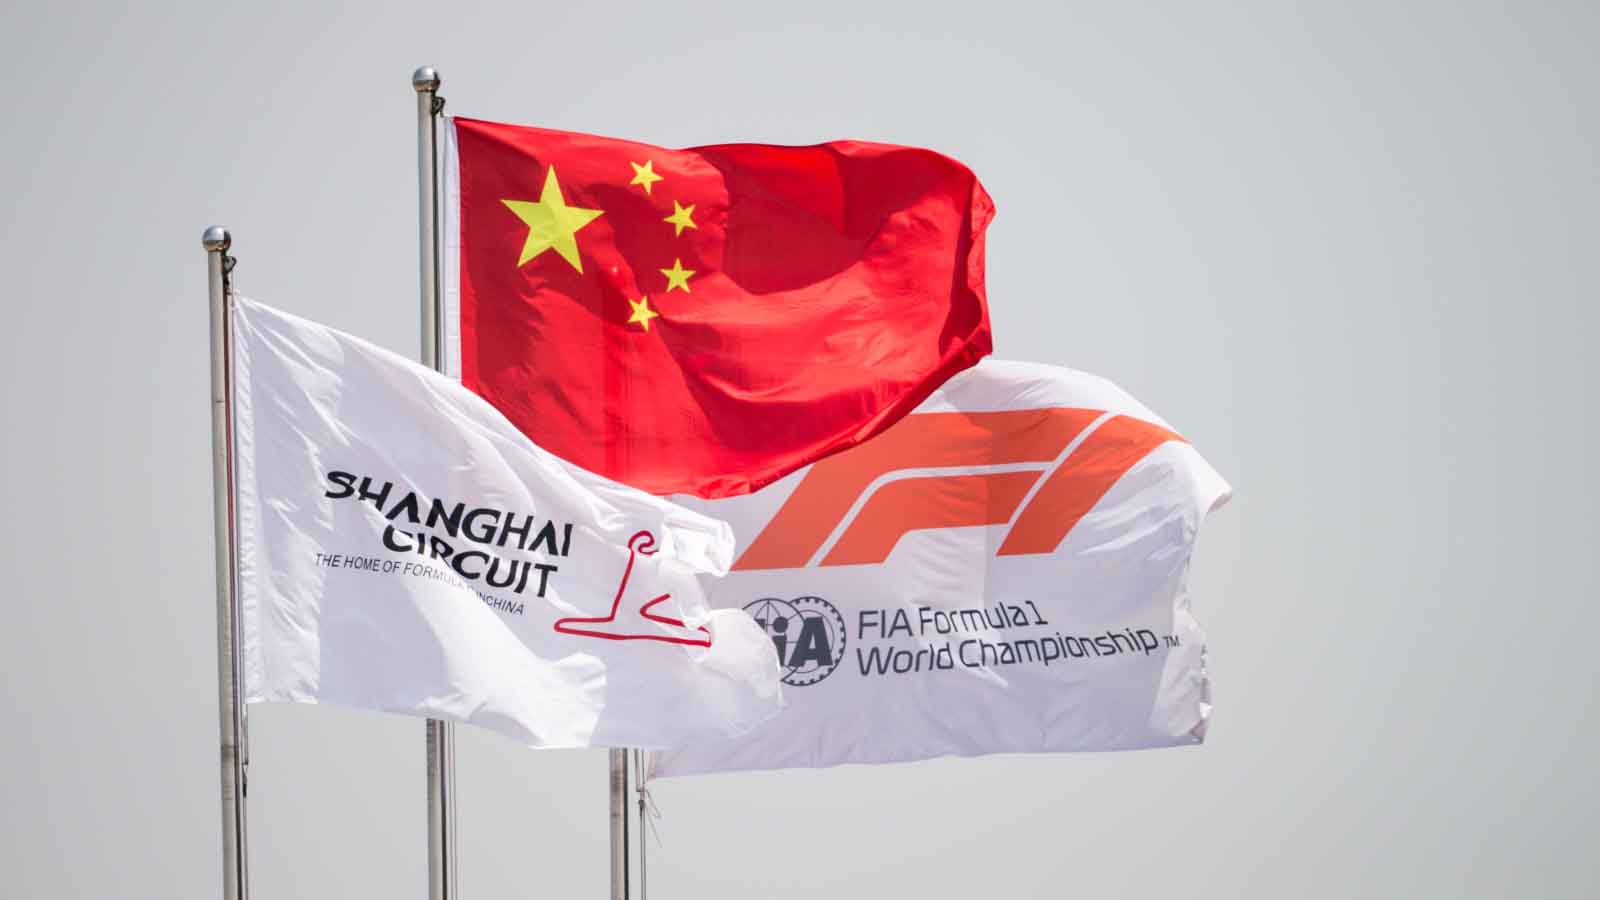 Flags of F1, China and the Shanghai International Circuit. 2018.